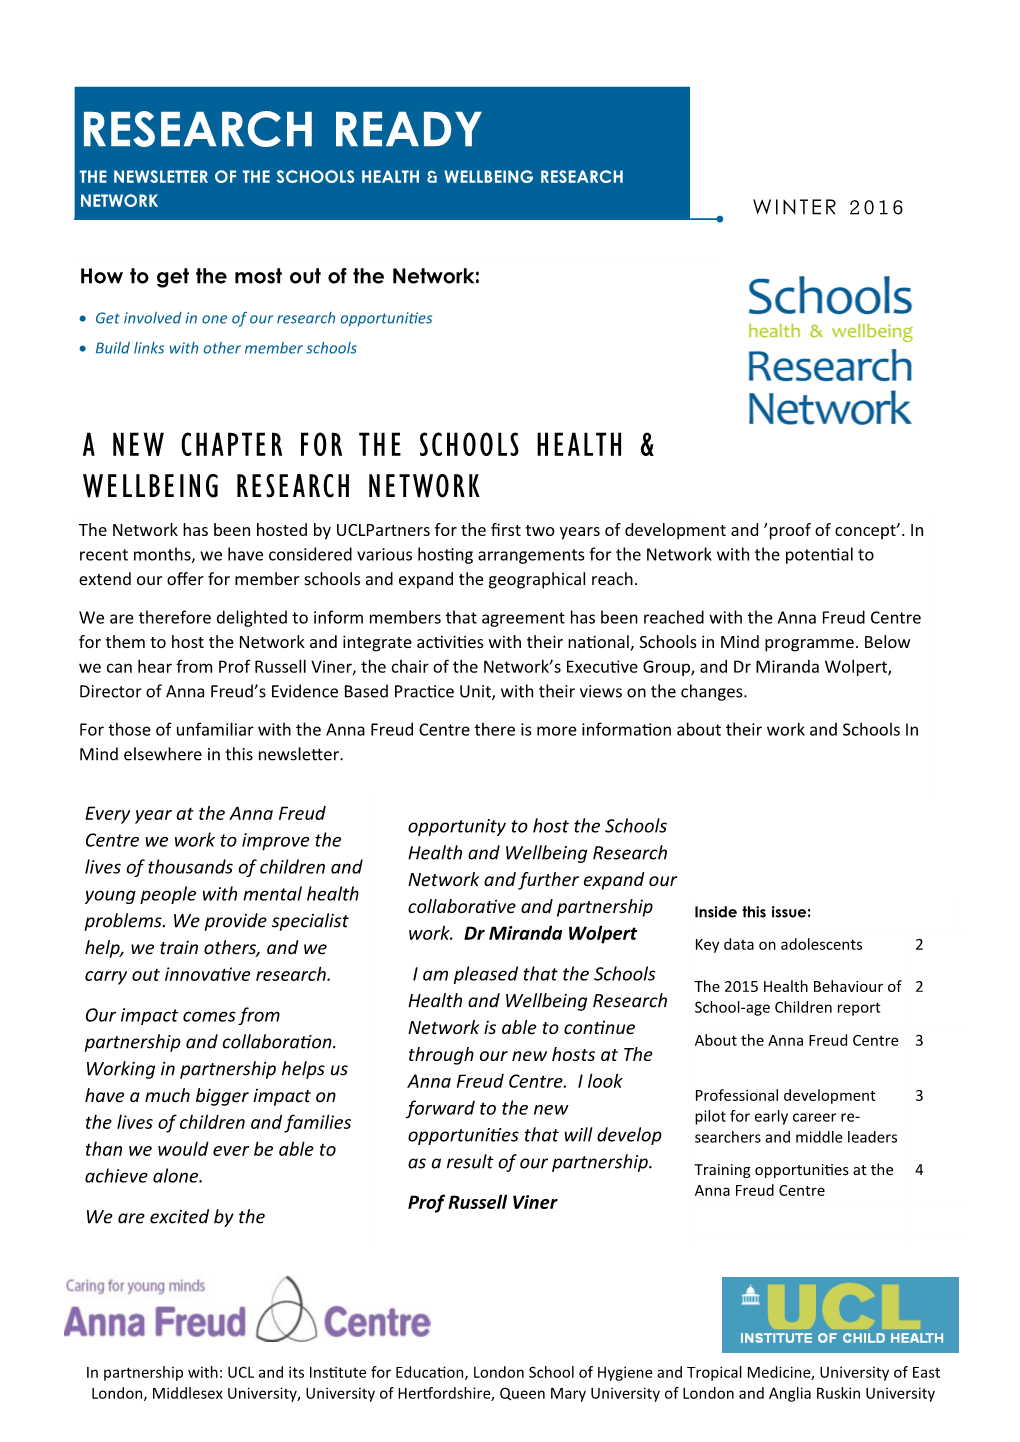 Research Ready the Newsletter of the Schools Health & Wellbeing Research Network Winter 2016